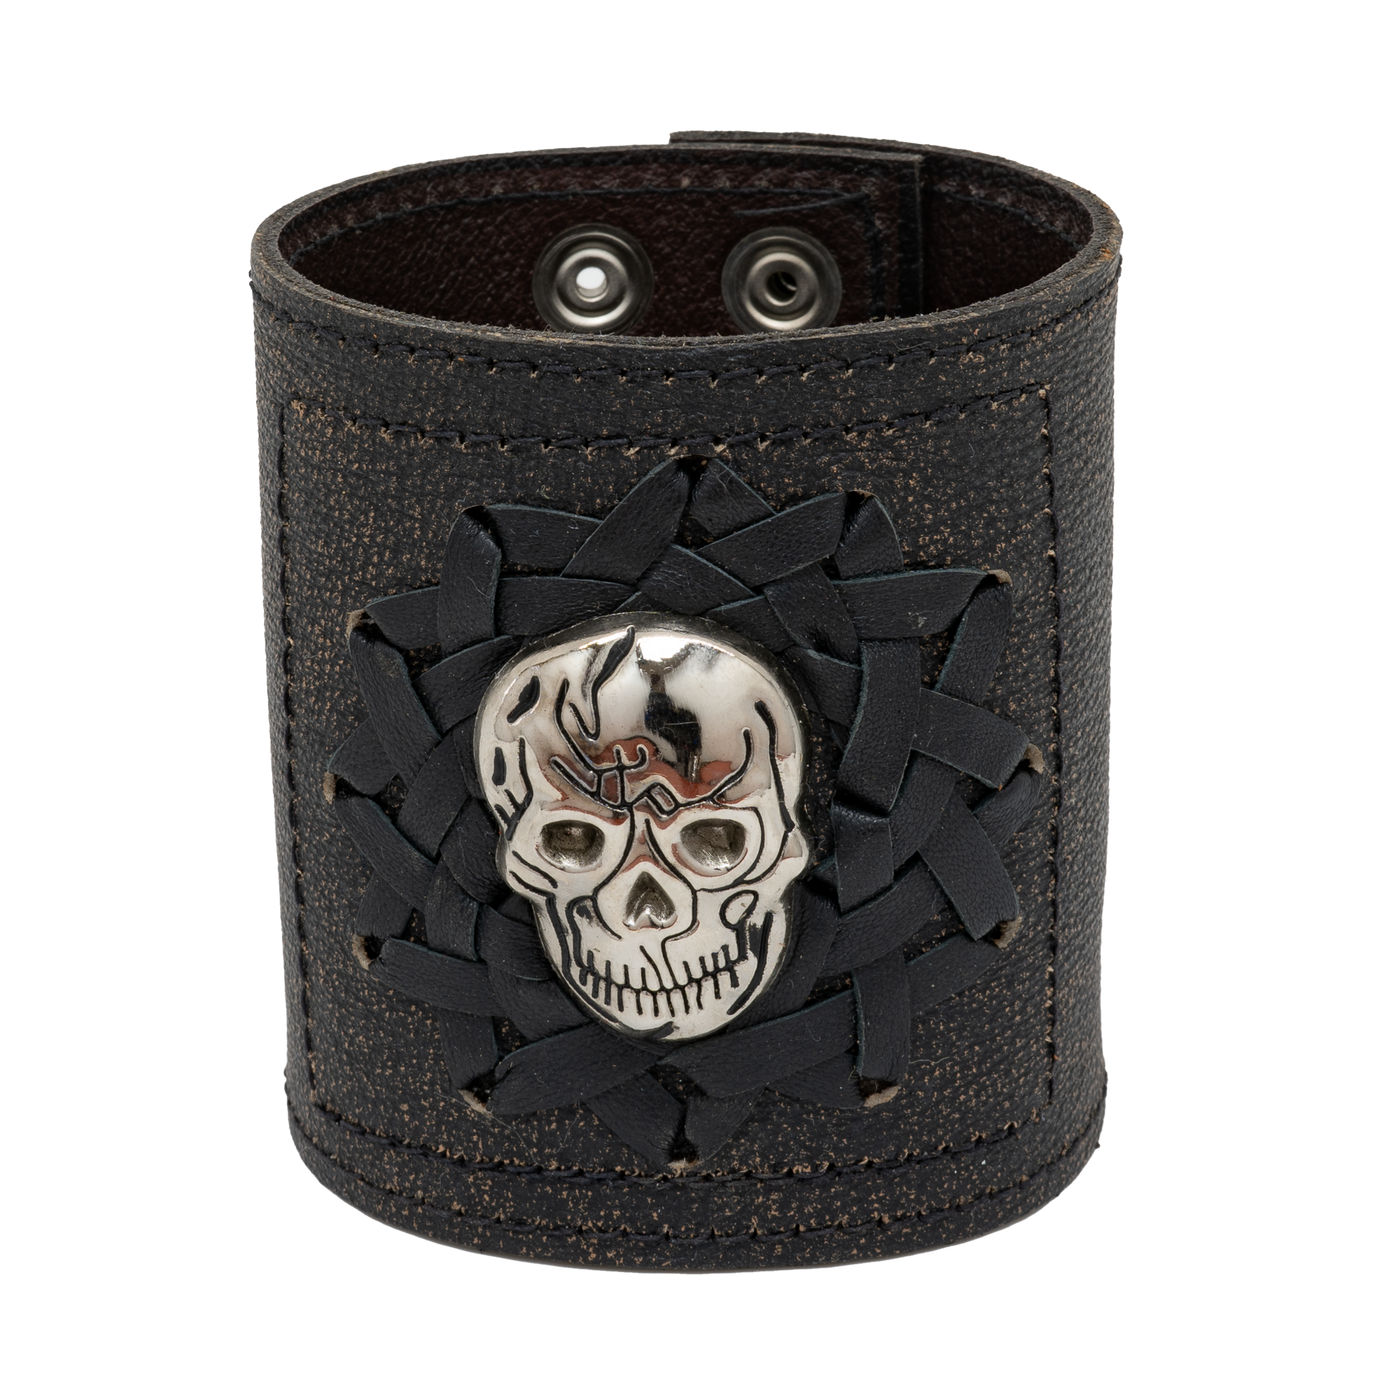 3D Skull Leather Wristband